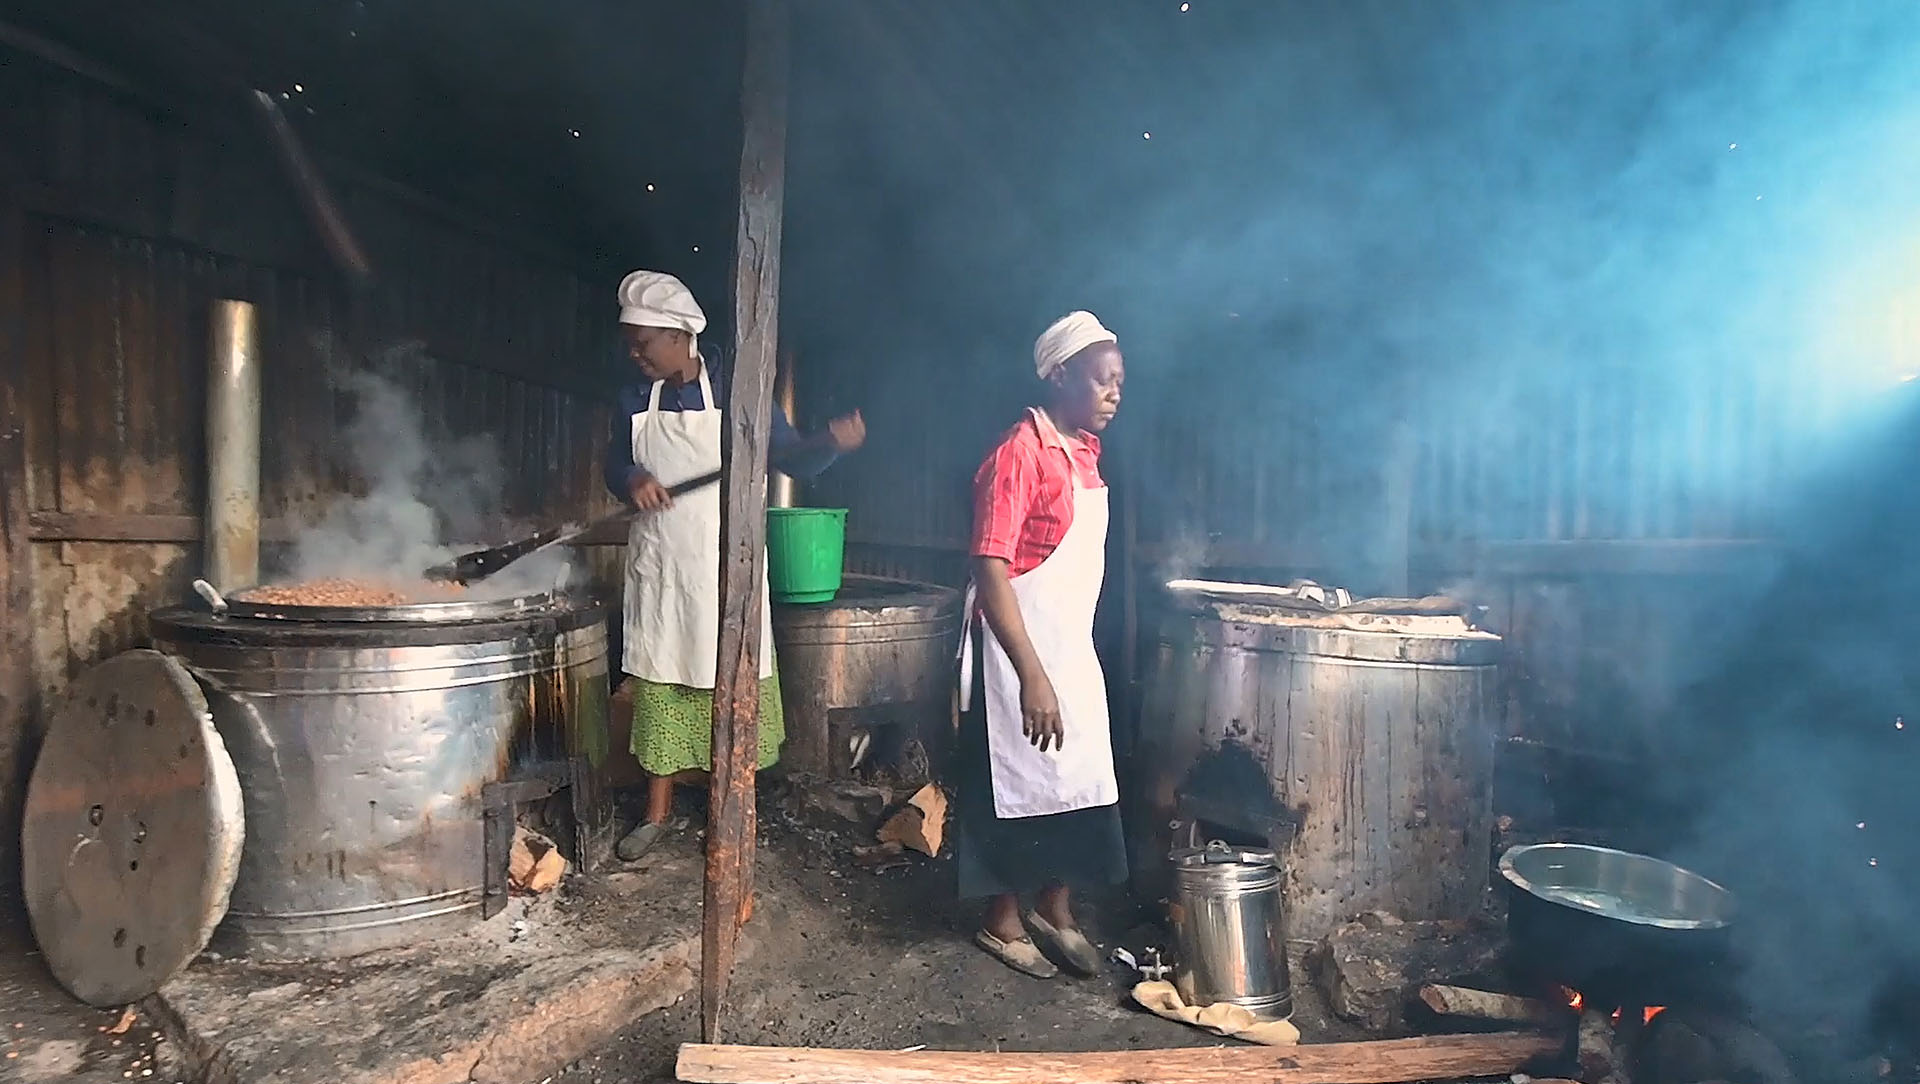 A majority of school kitchens across Sub-Saharan Africa cook with biomass, exposing cooks, pupils and staff to high levels of pollution